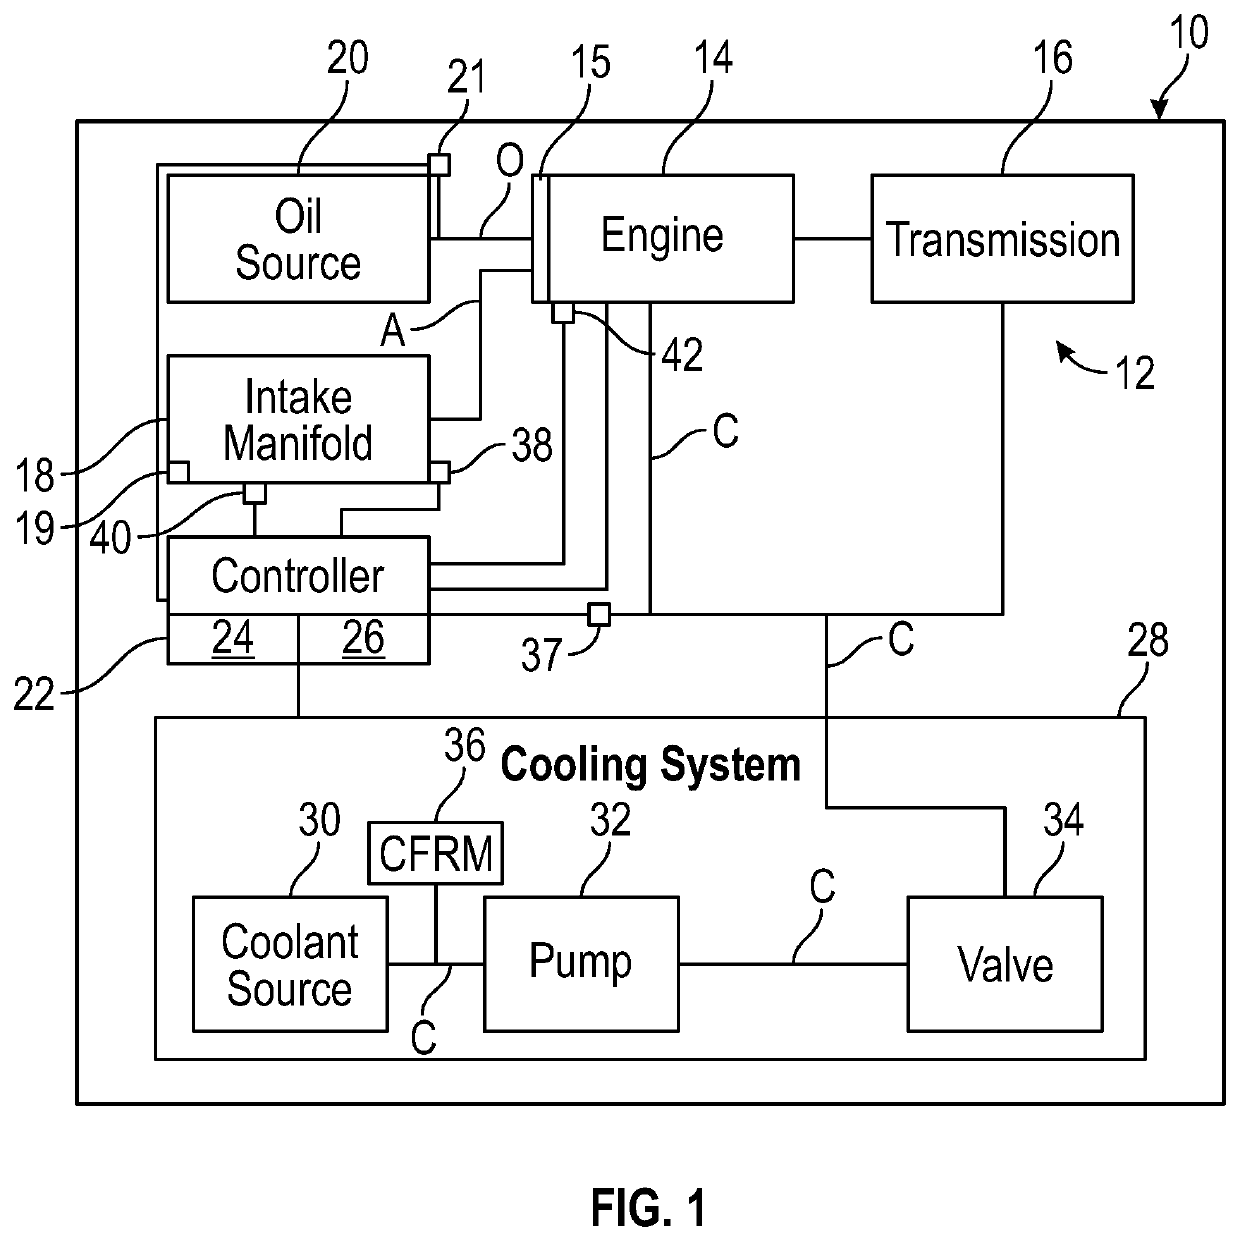 Method and apparatus for control of propulsion system warmup based on engine wall temperature